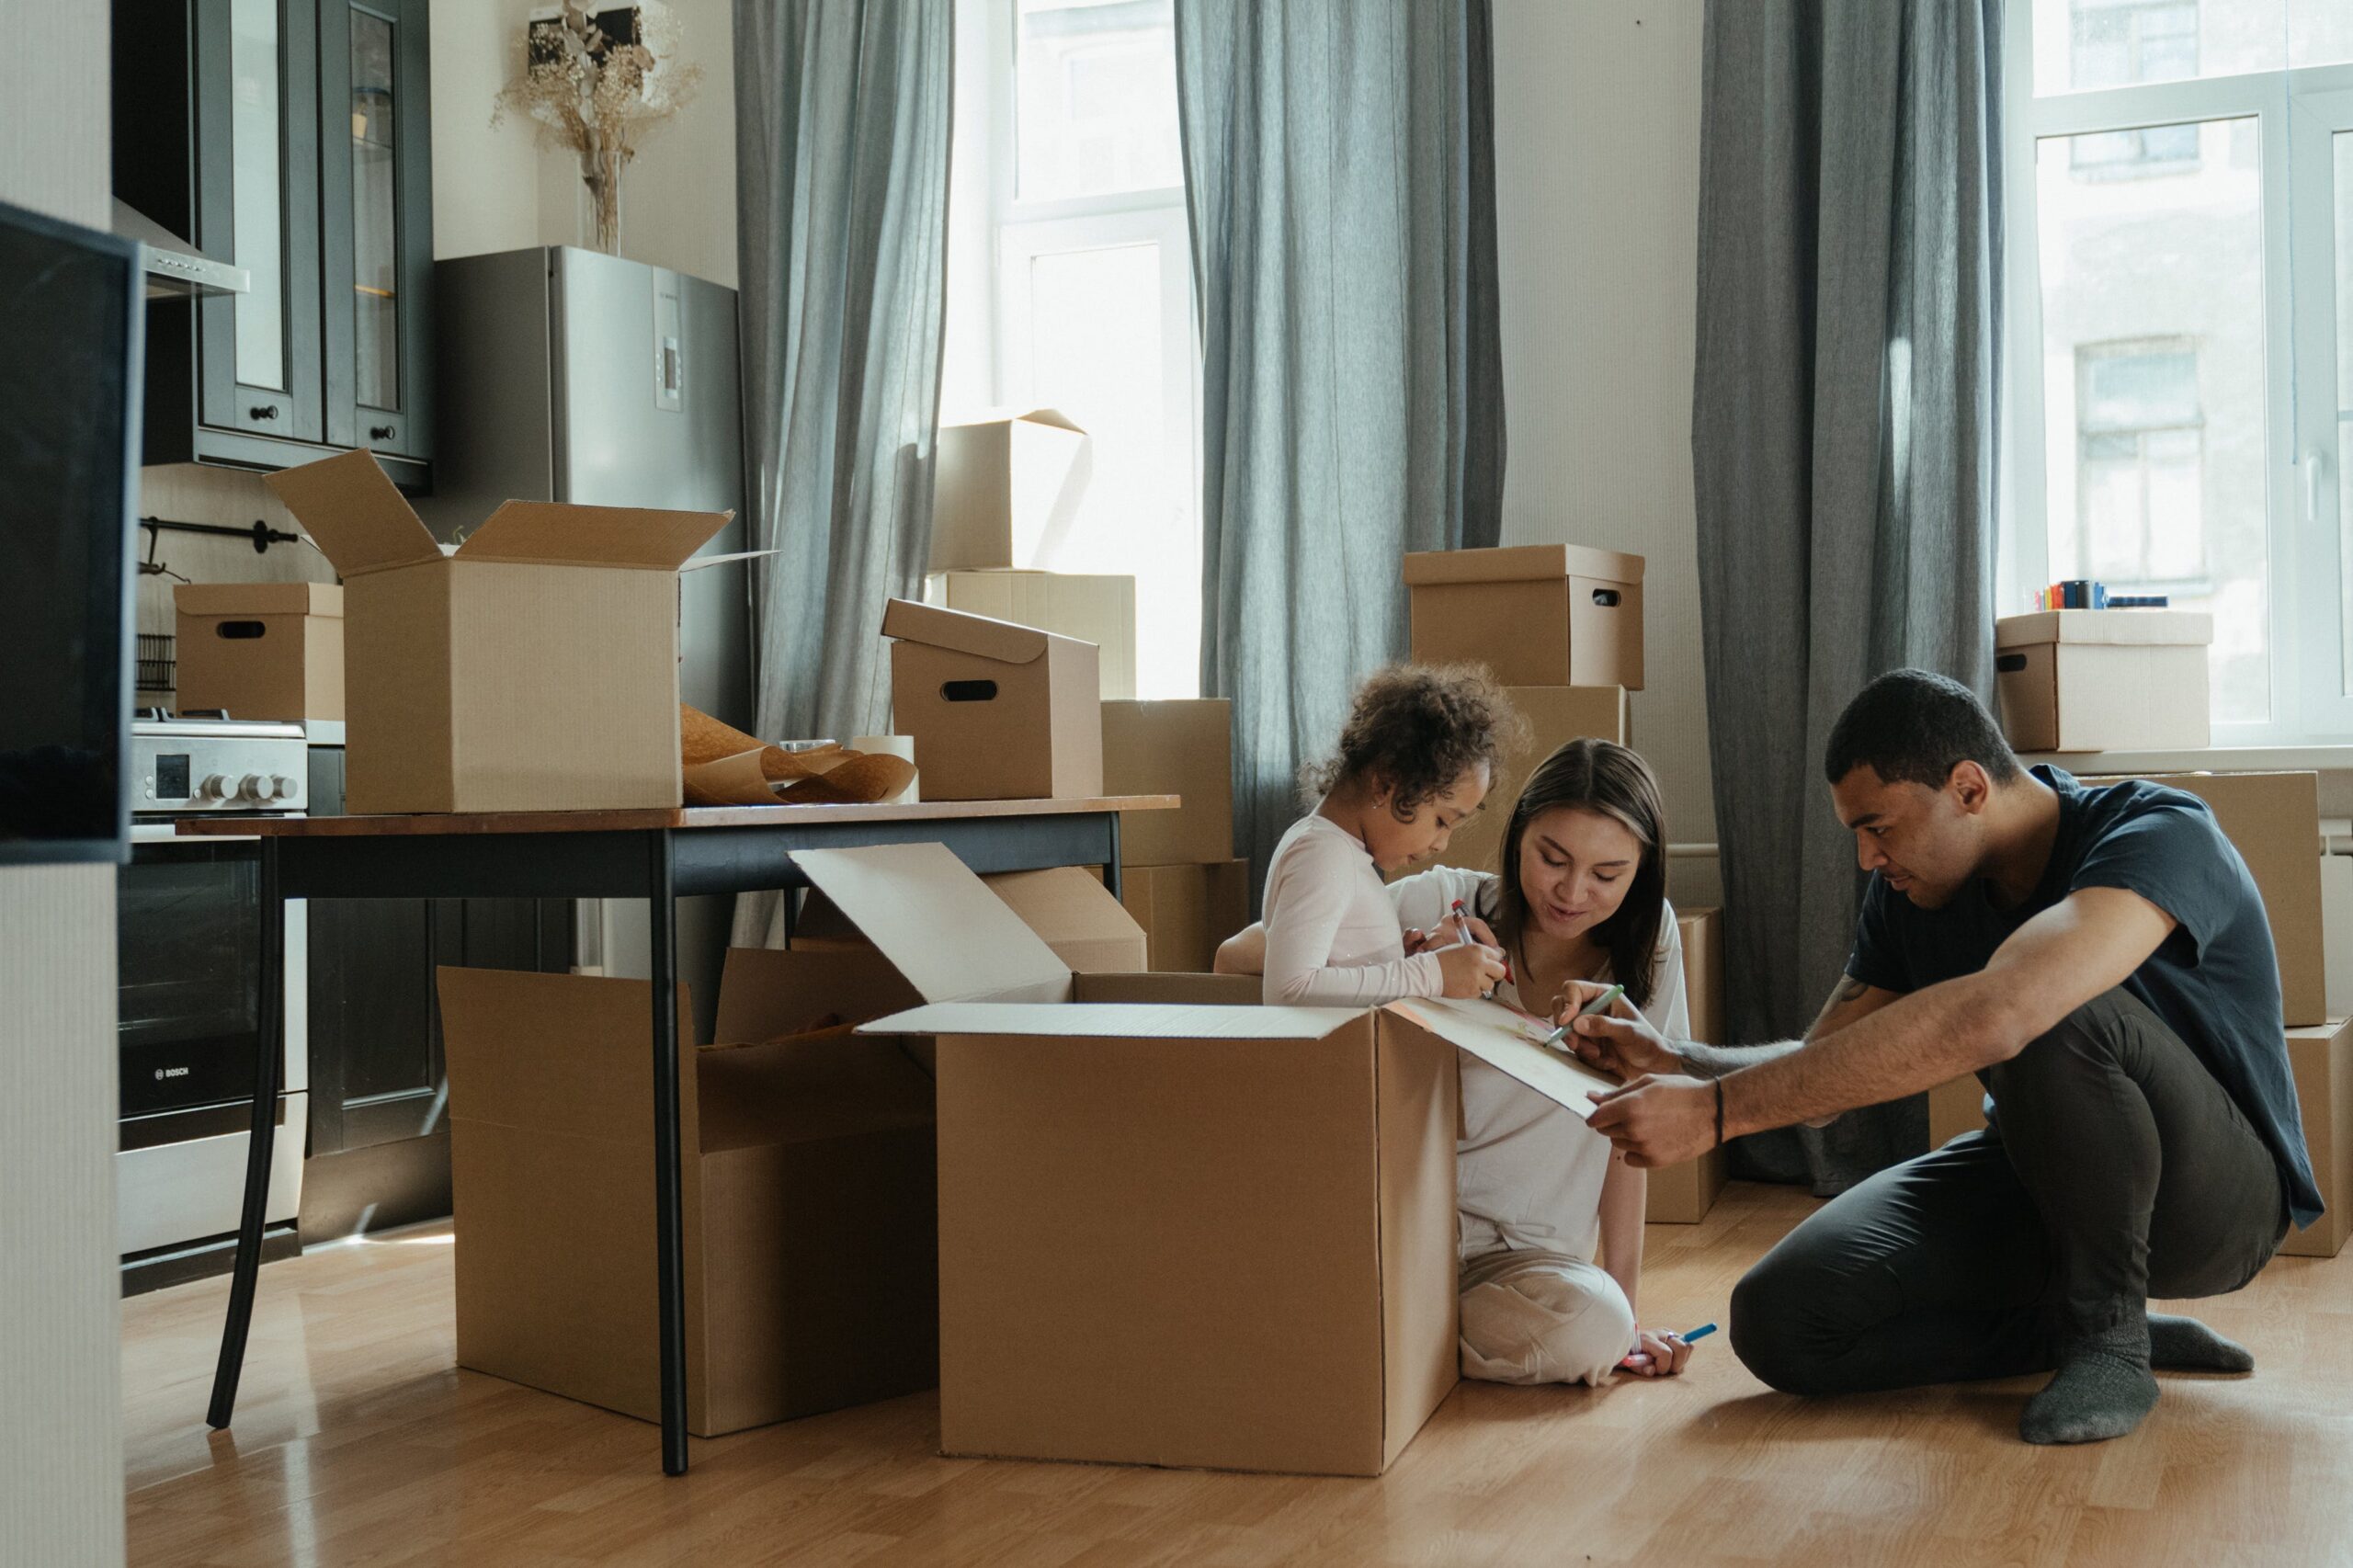 Certain moving expenses were tax-deductible prior to 2018